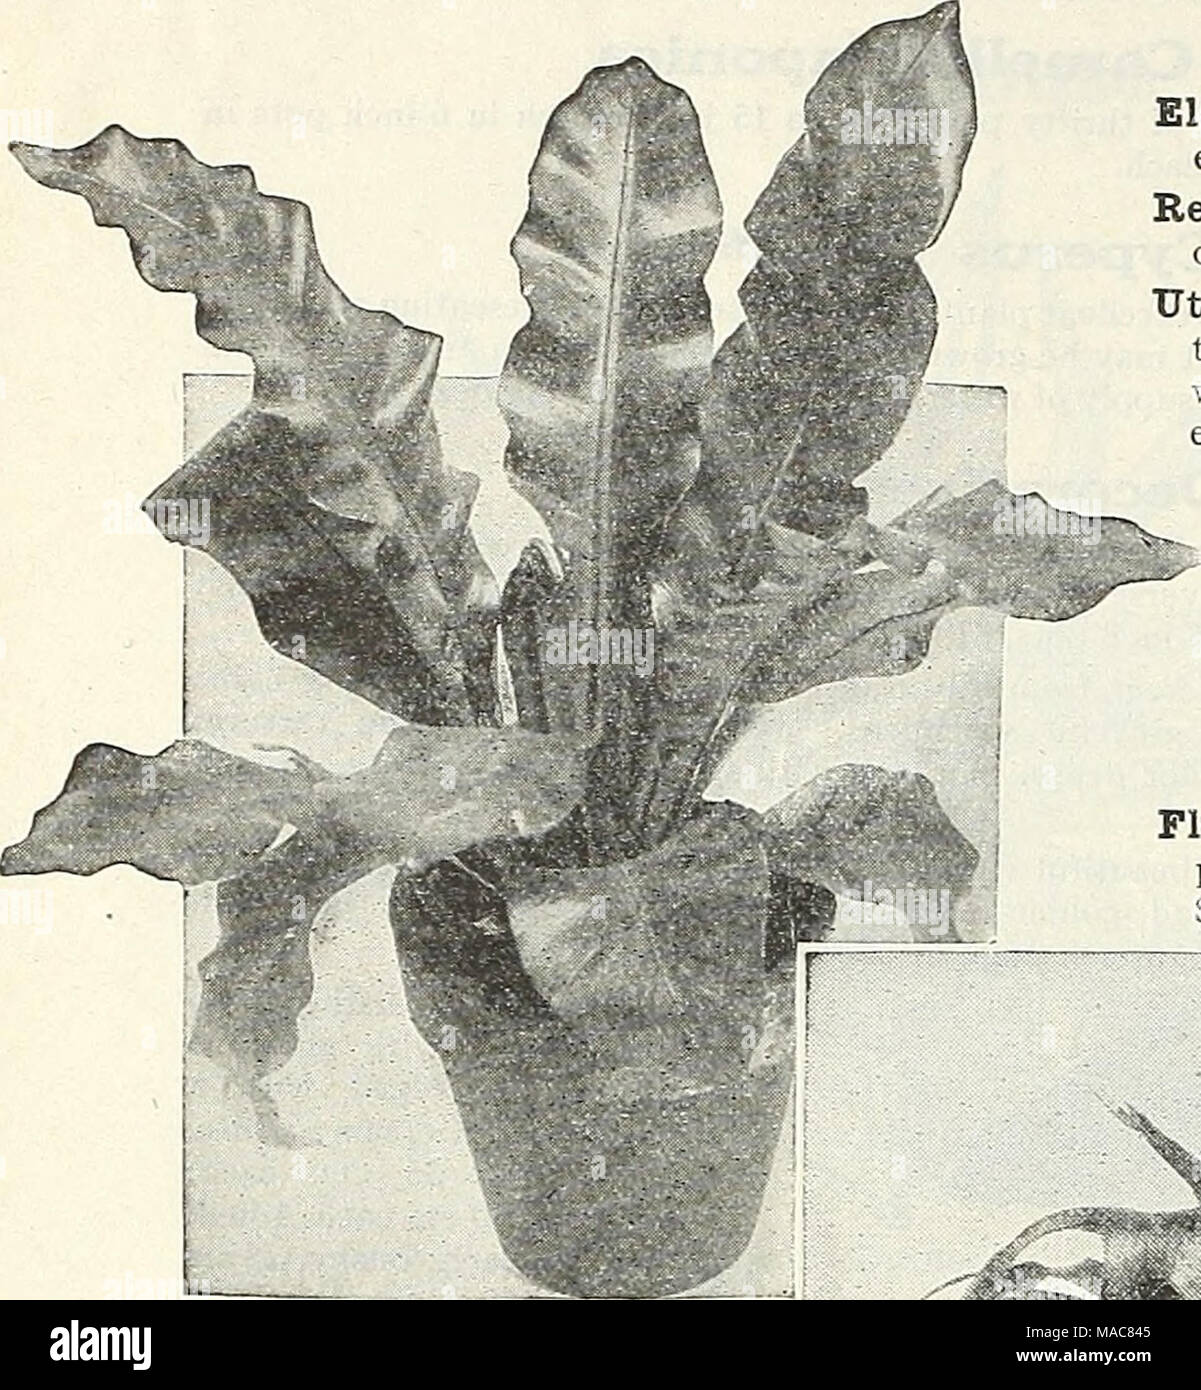 . Dreer's midsummer list 1931 . Platycerium Alcicorne Major AsPLENiuM Nidus Ams Fine Ferns Adiantum Farleyense Glor- iosa {The Glory Fern). An easy-growing form of that mobt beautiful of all Maiden Hairs, Adiantum Farleyense. Good plants, in 3-inch pots, 50 cts. each; 4-inch pots, Sl.OO each. Adiantum Wrighti. A com- paratively new variety of the Maiden Hair type with large fronds which are of a particu- larly rich pleasing green color. A good hardy variety suitable for the house. 4-inch pots, 75 cts. each. Asplenium Nidus Avis {Bird's Nest Fern). We have a splendid lot of this interesting Fer Stock Photo